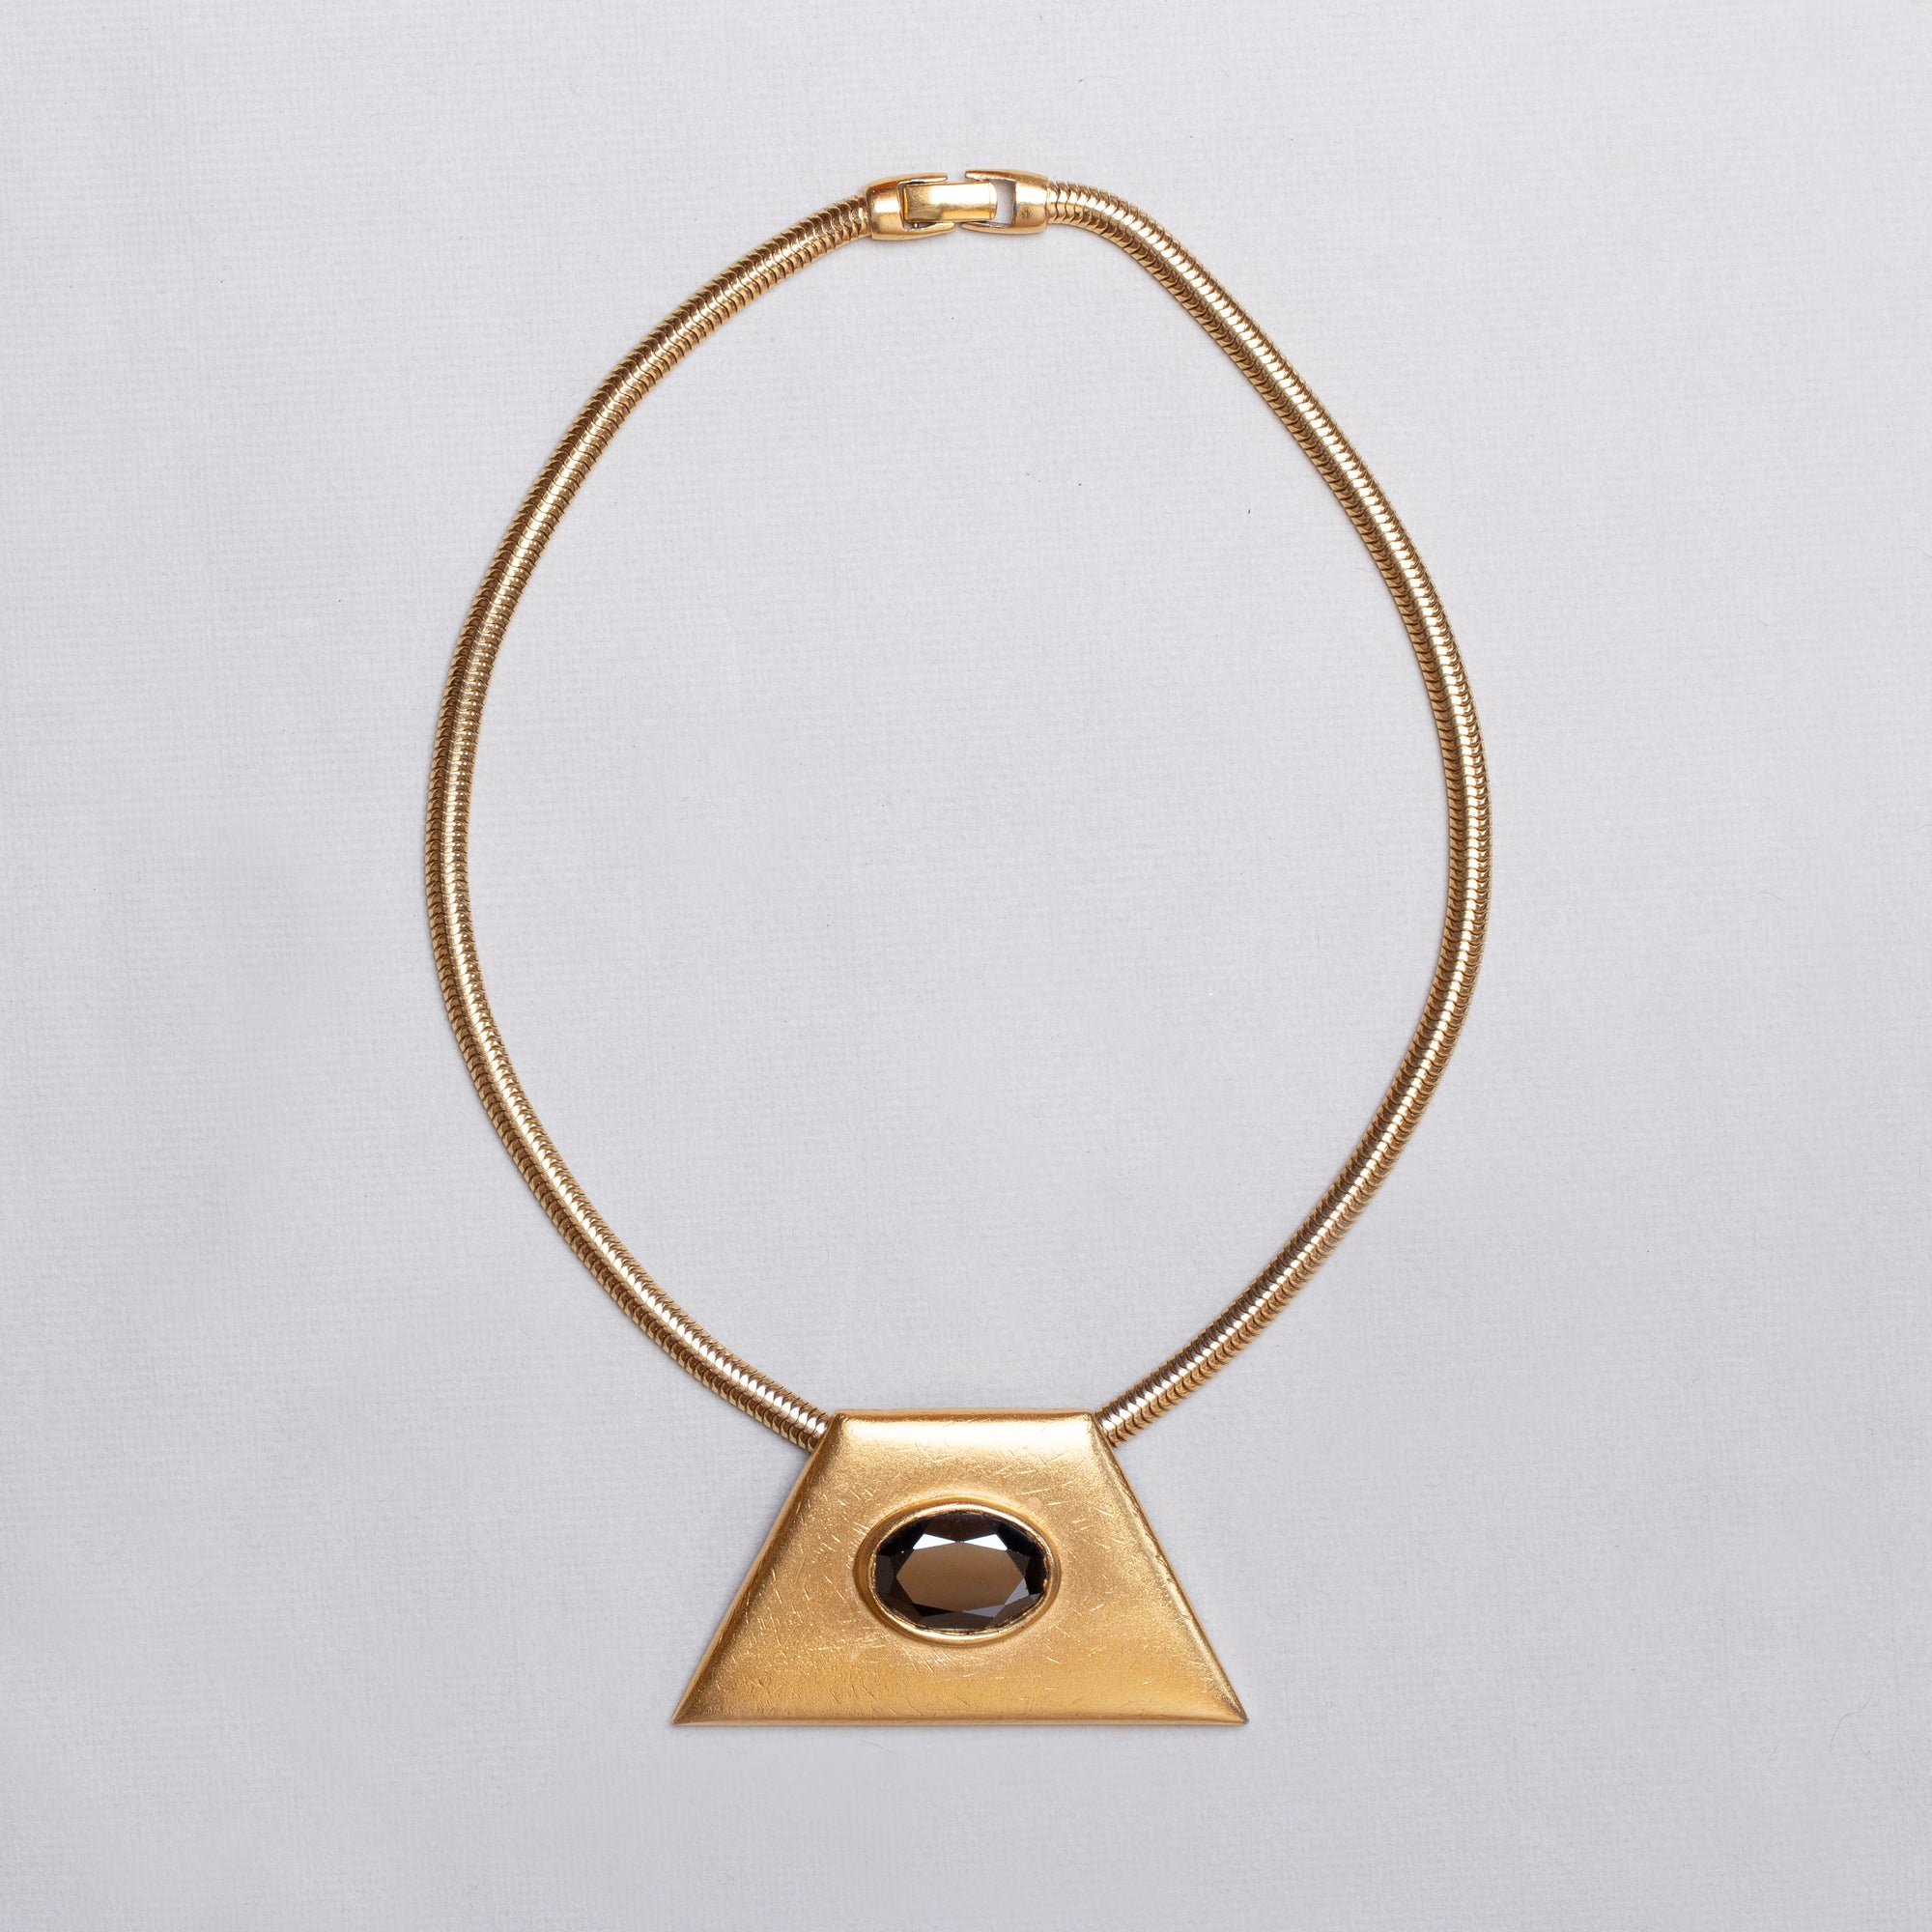 Vintage YSL Gold Chain Necklace with Matte Gold Pendant